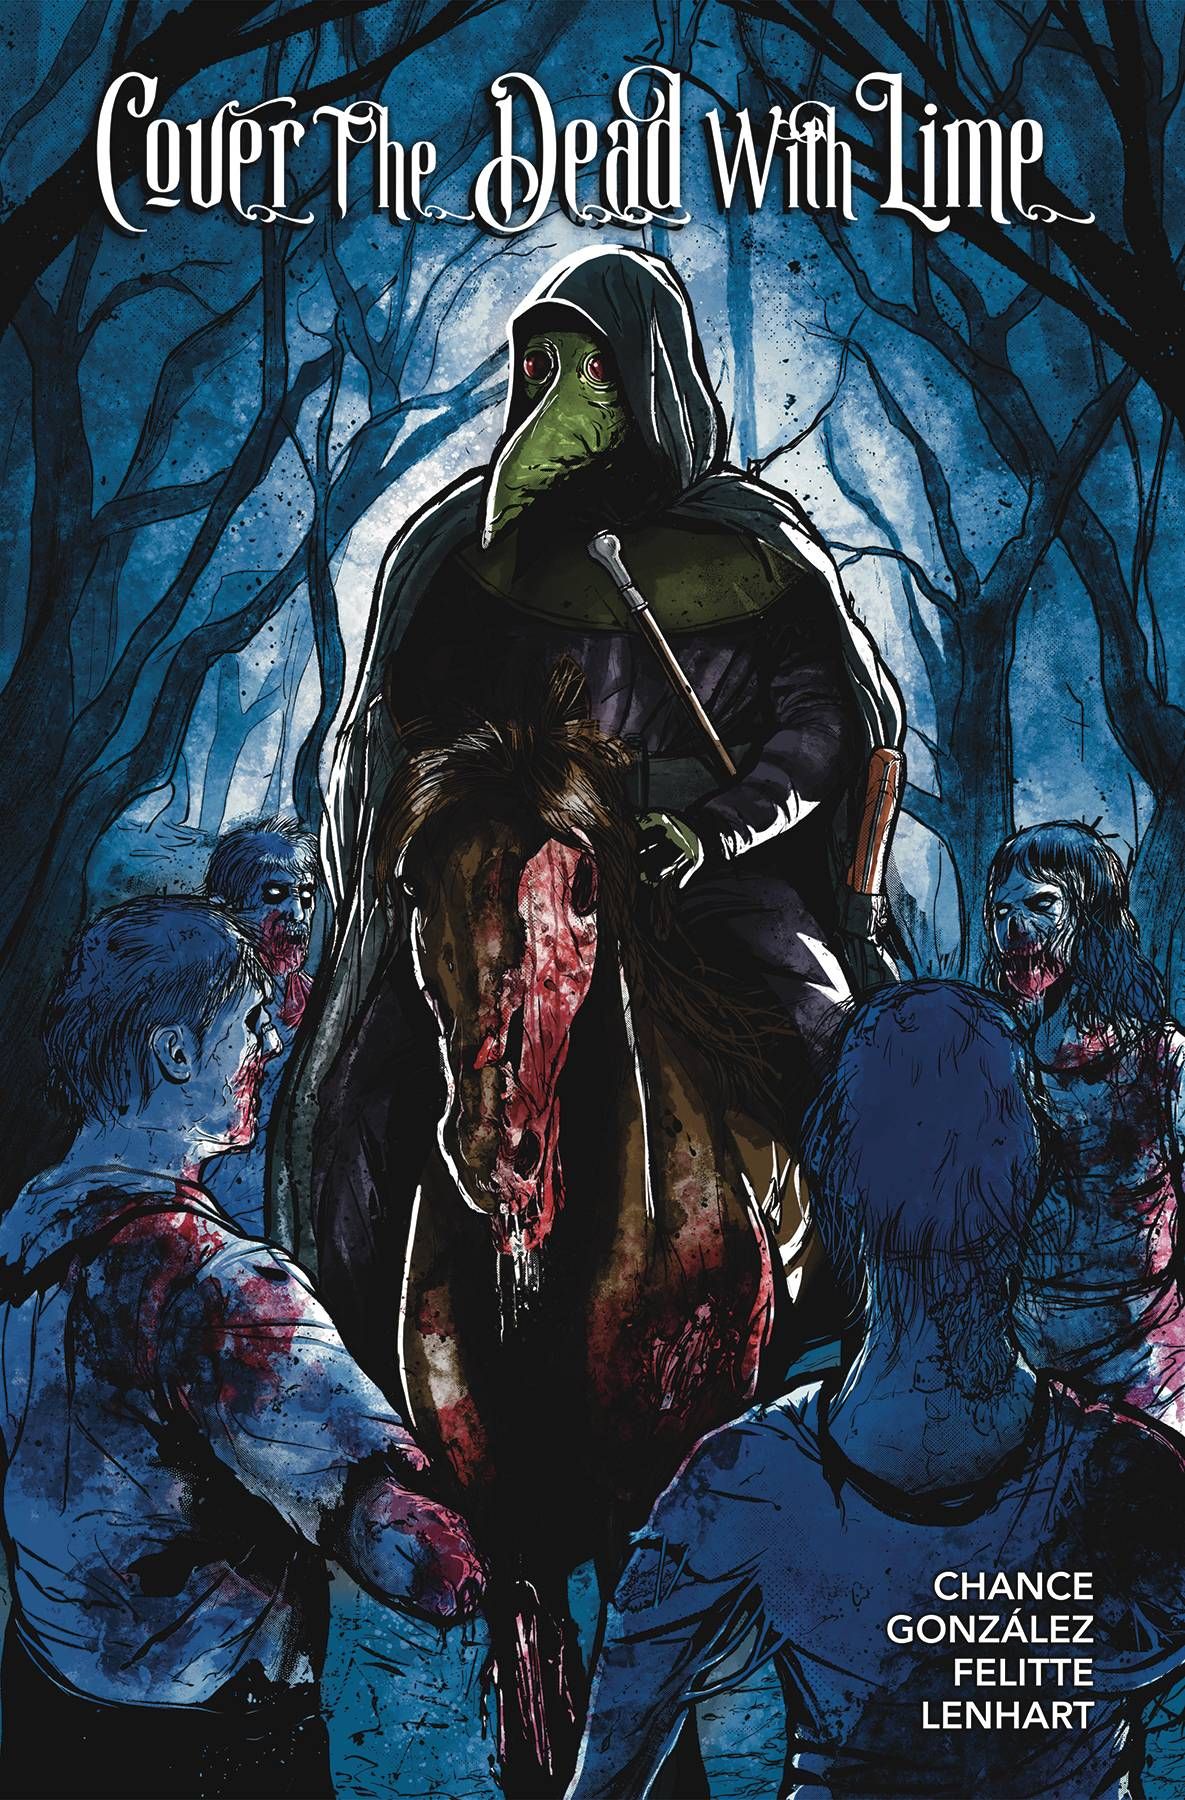 Cover the Dead with Lime #3 Comic